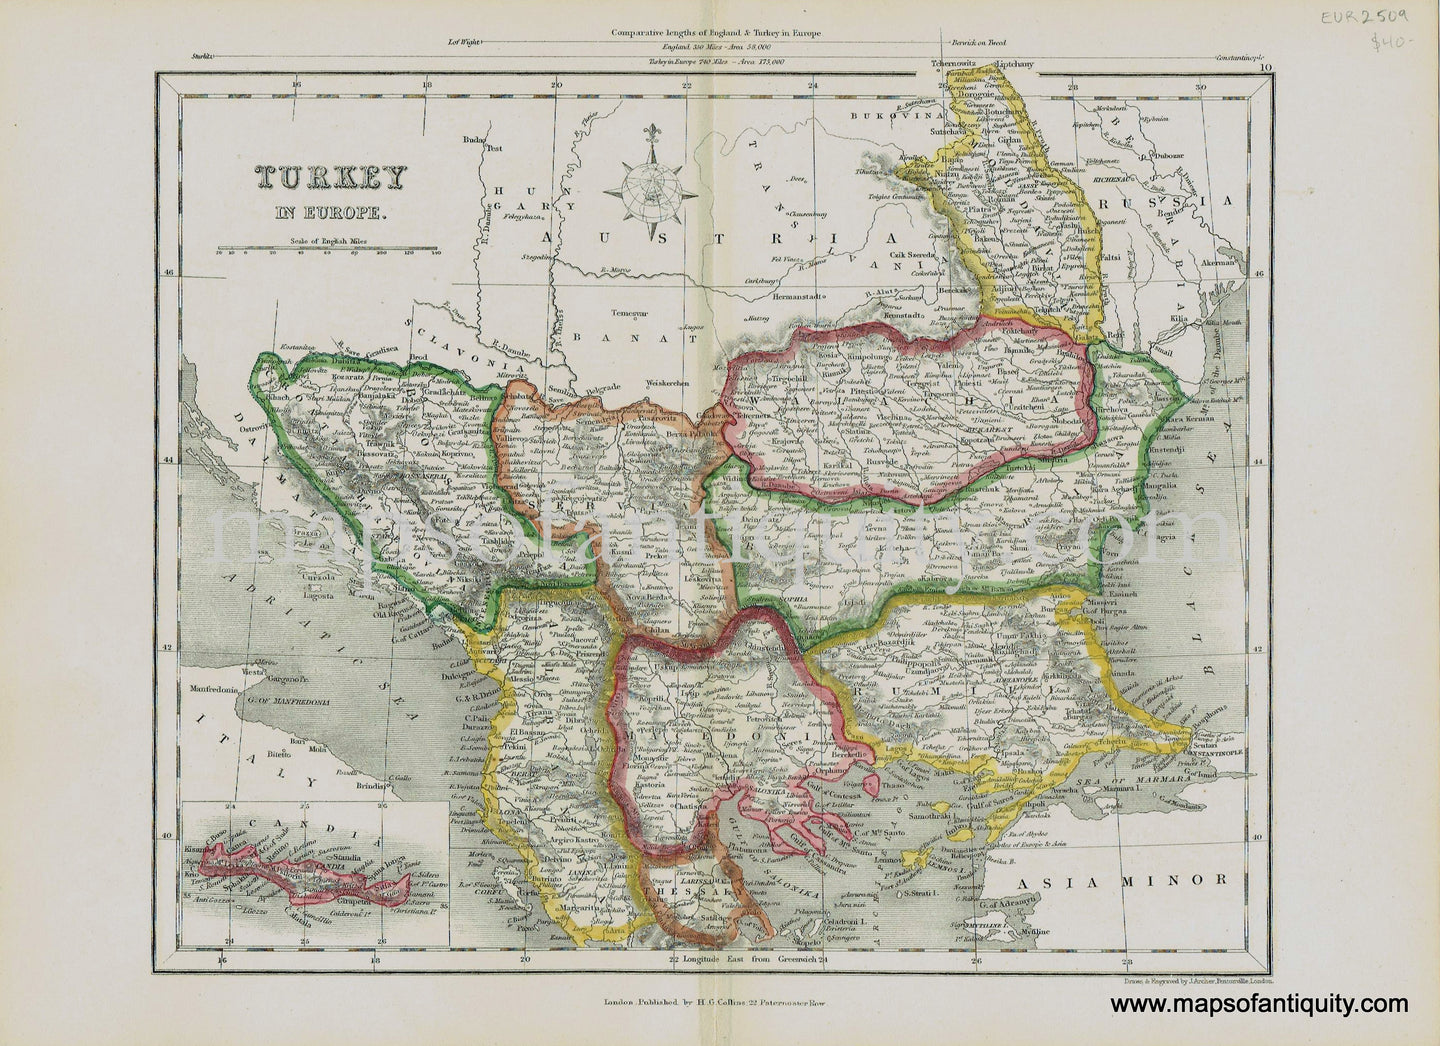 Antique-Hand-Colored-Map-Turkey-in-Europe-c.-1860-Archer-Collins-Turkey-1800s-19th-century-Maps-of-Antiquity